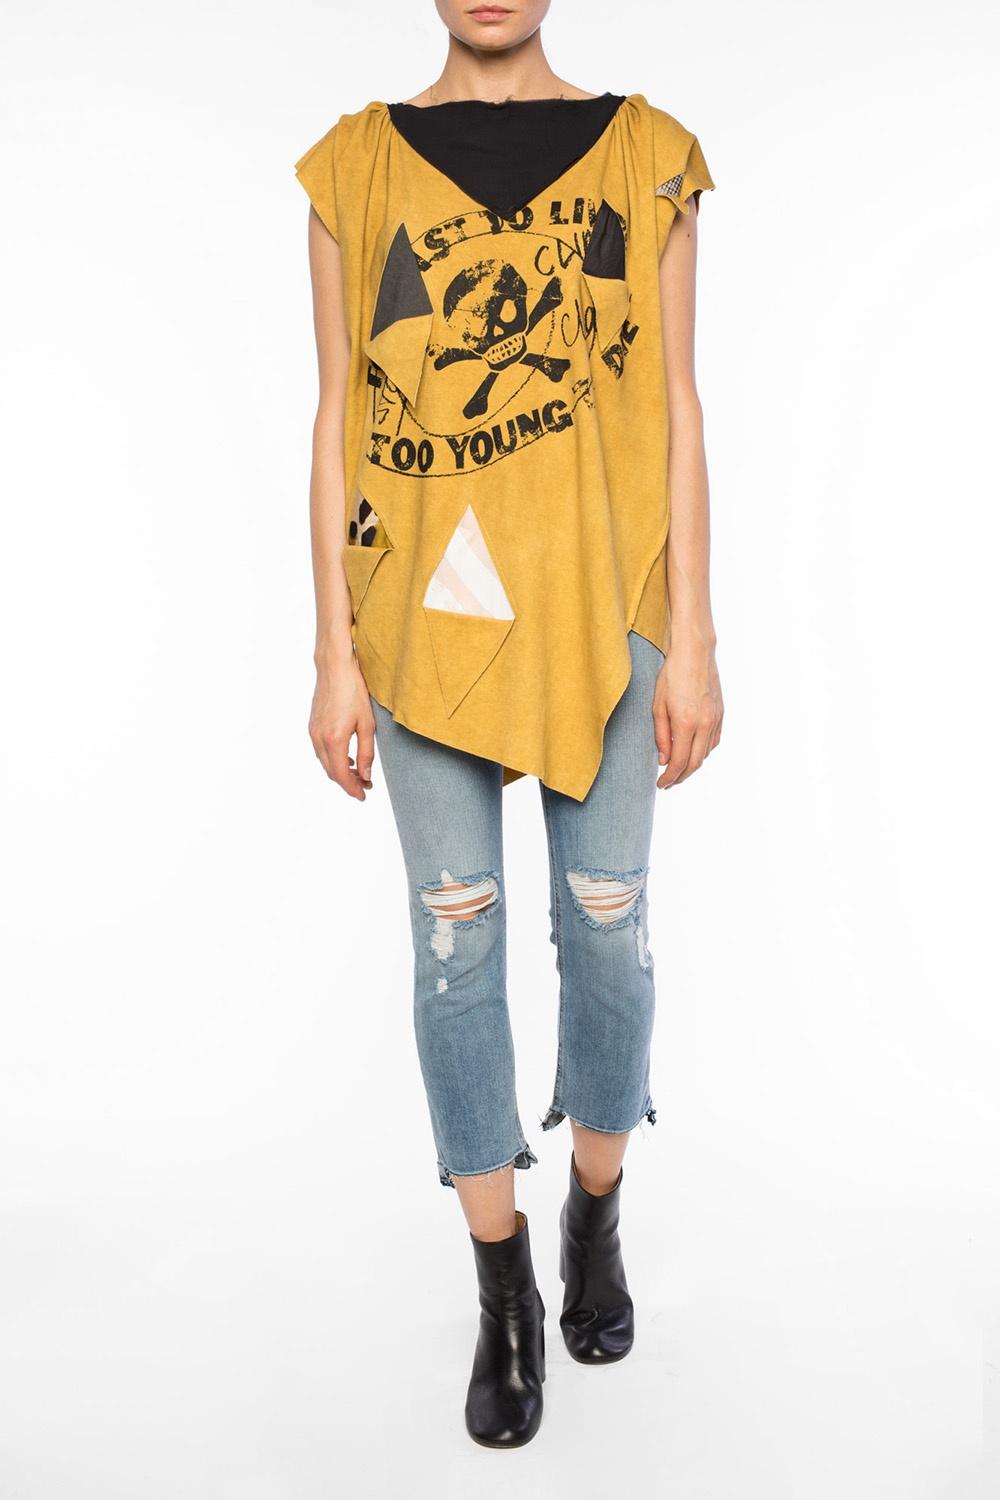 Vivienne Westwood Skull ’Too fast To Live Too Young to Dire’ Deconstructed Yellow Shredded Asymmetric Punk Rock Goth Tunic Shirt T-Shirt Tee

Yellow cotton oversize T-shirt from Vivienne Westwood Anglomania. Black sheer inserts. Print with motif of